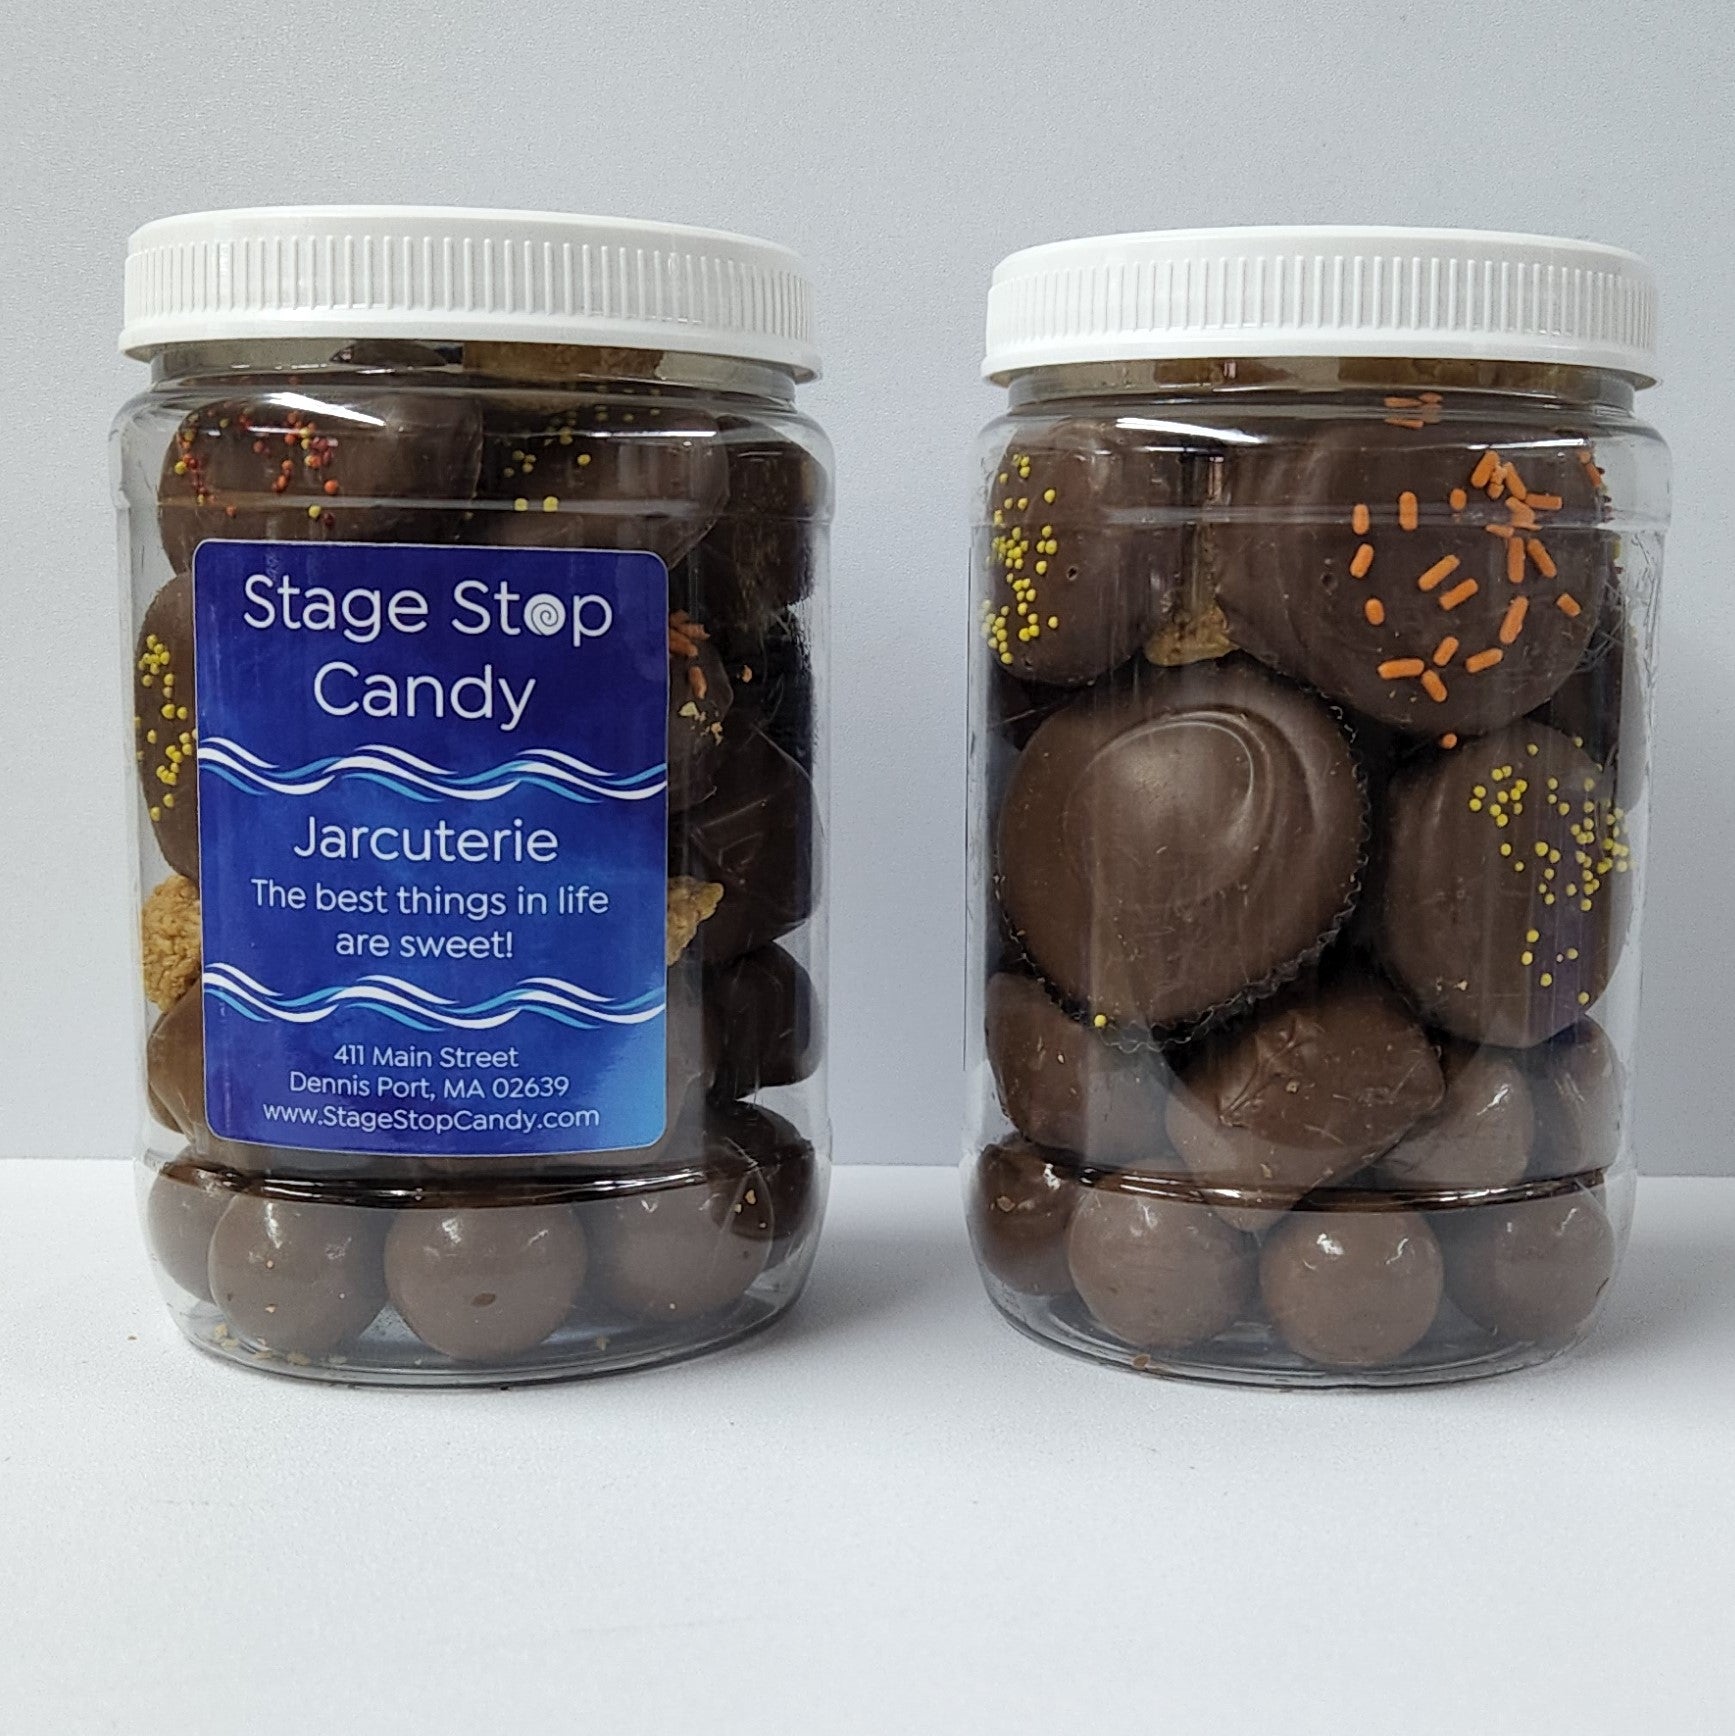 Stage Stop Candy's Peanut Butter Only Jarcuterie Jar featuring an array of handcrafted peanut butter treats. 